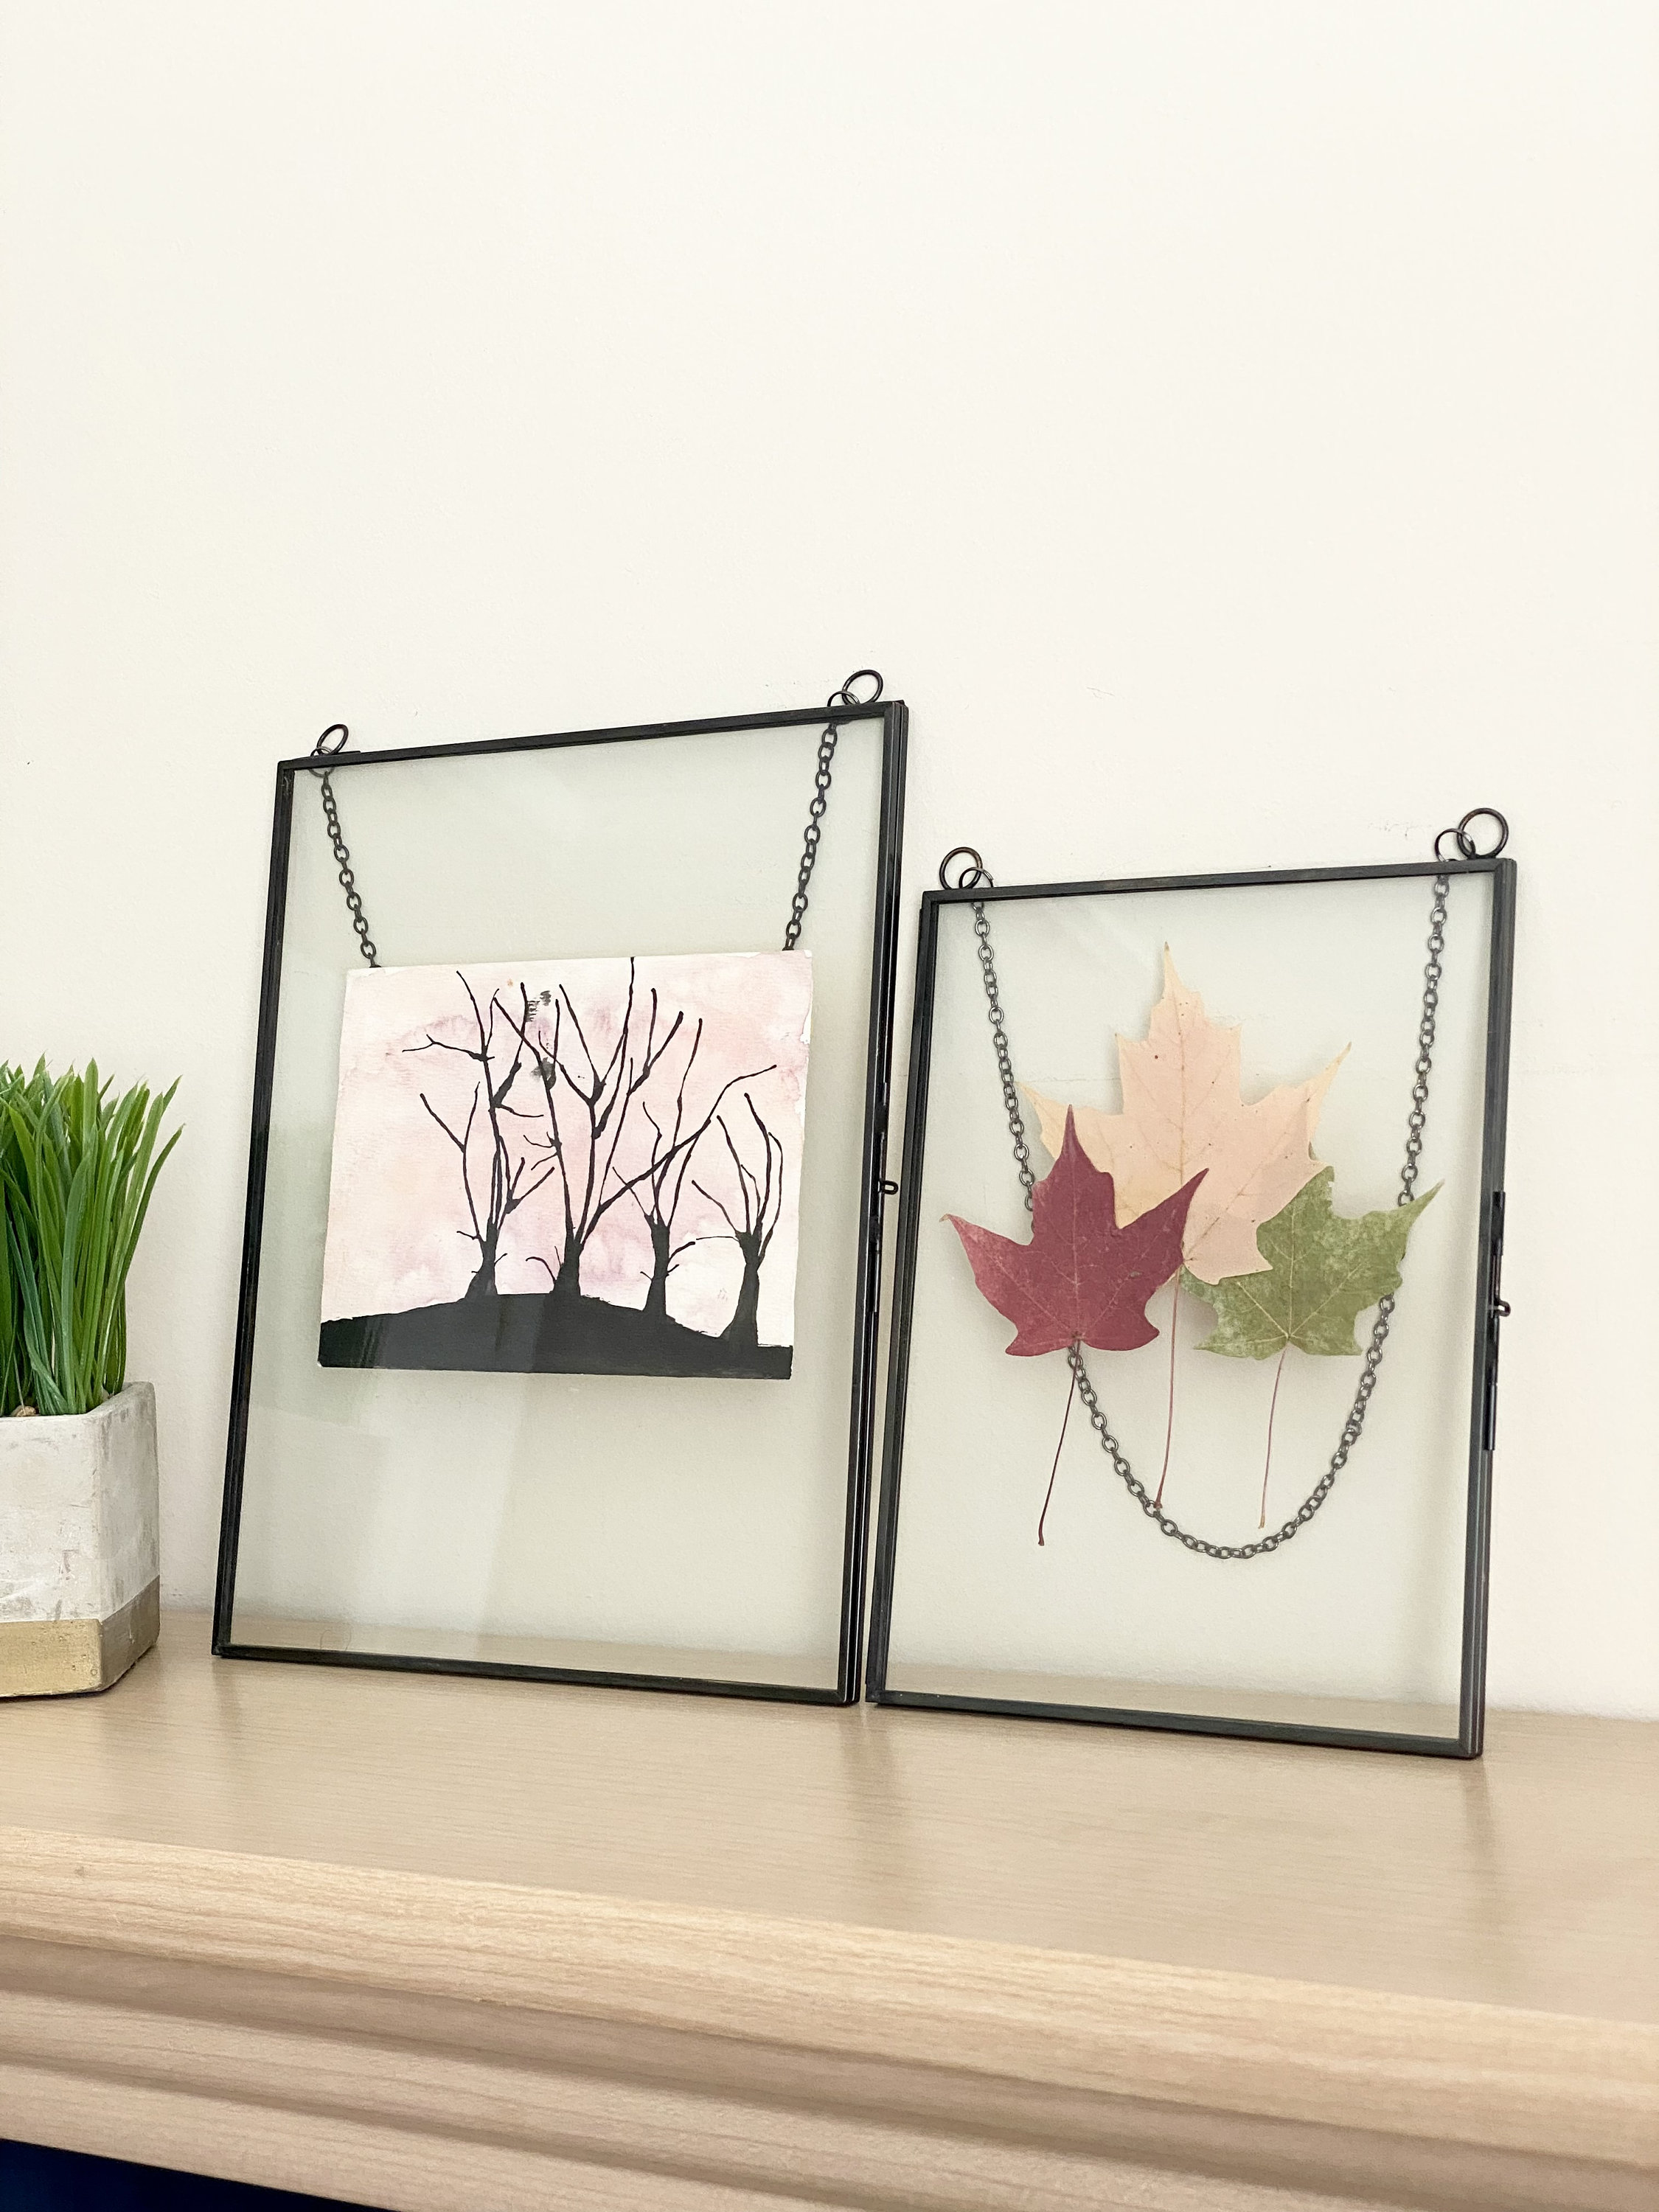  Glass Frame for Pressed Flowers, Leaf and Artwork - Hanging  Gold 6x6 Square Metal Picture Frames, Clear Double Glass Floating Frame,  Wall Decor Photo Display, Set of 2 Flower Press